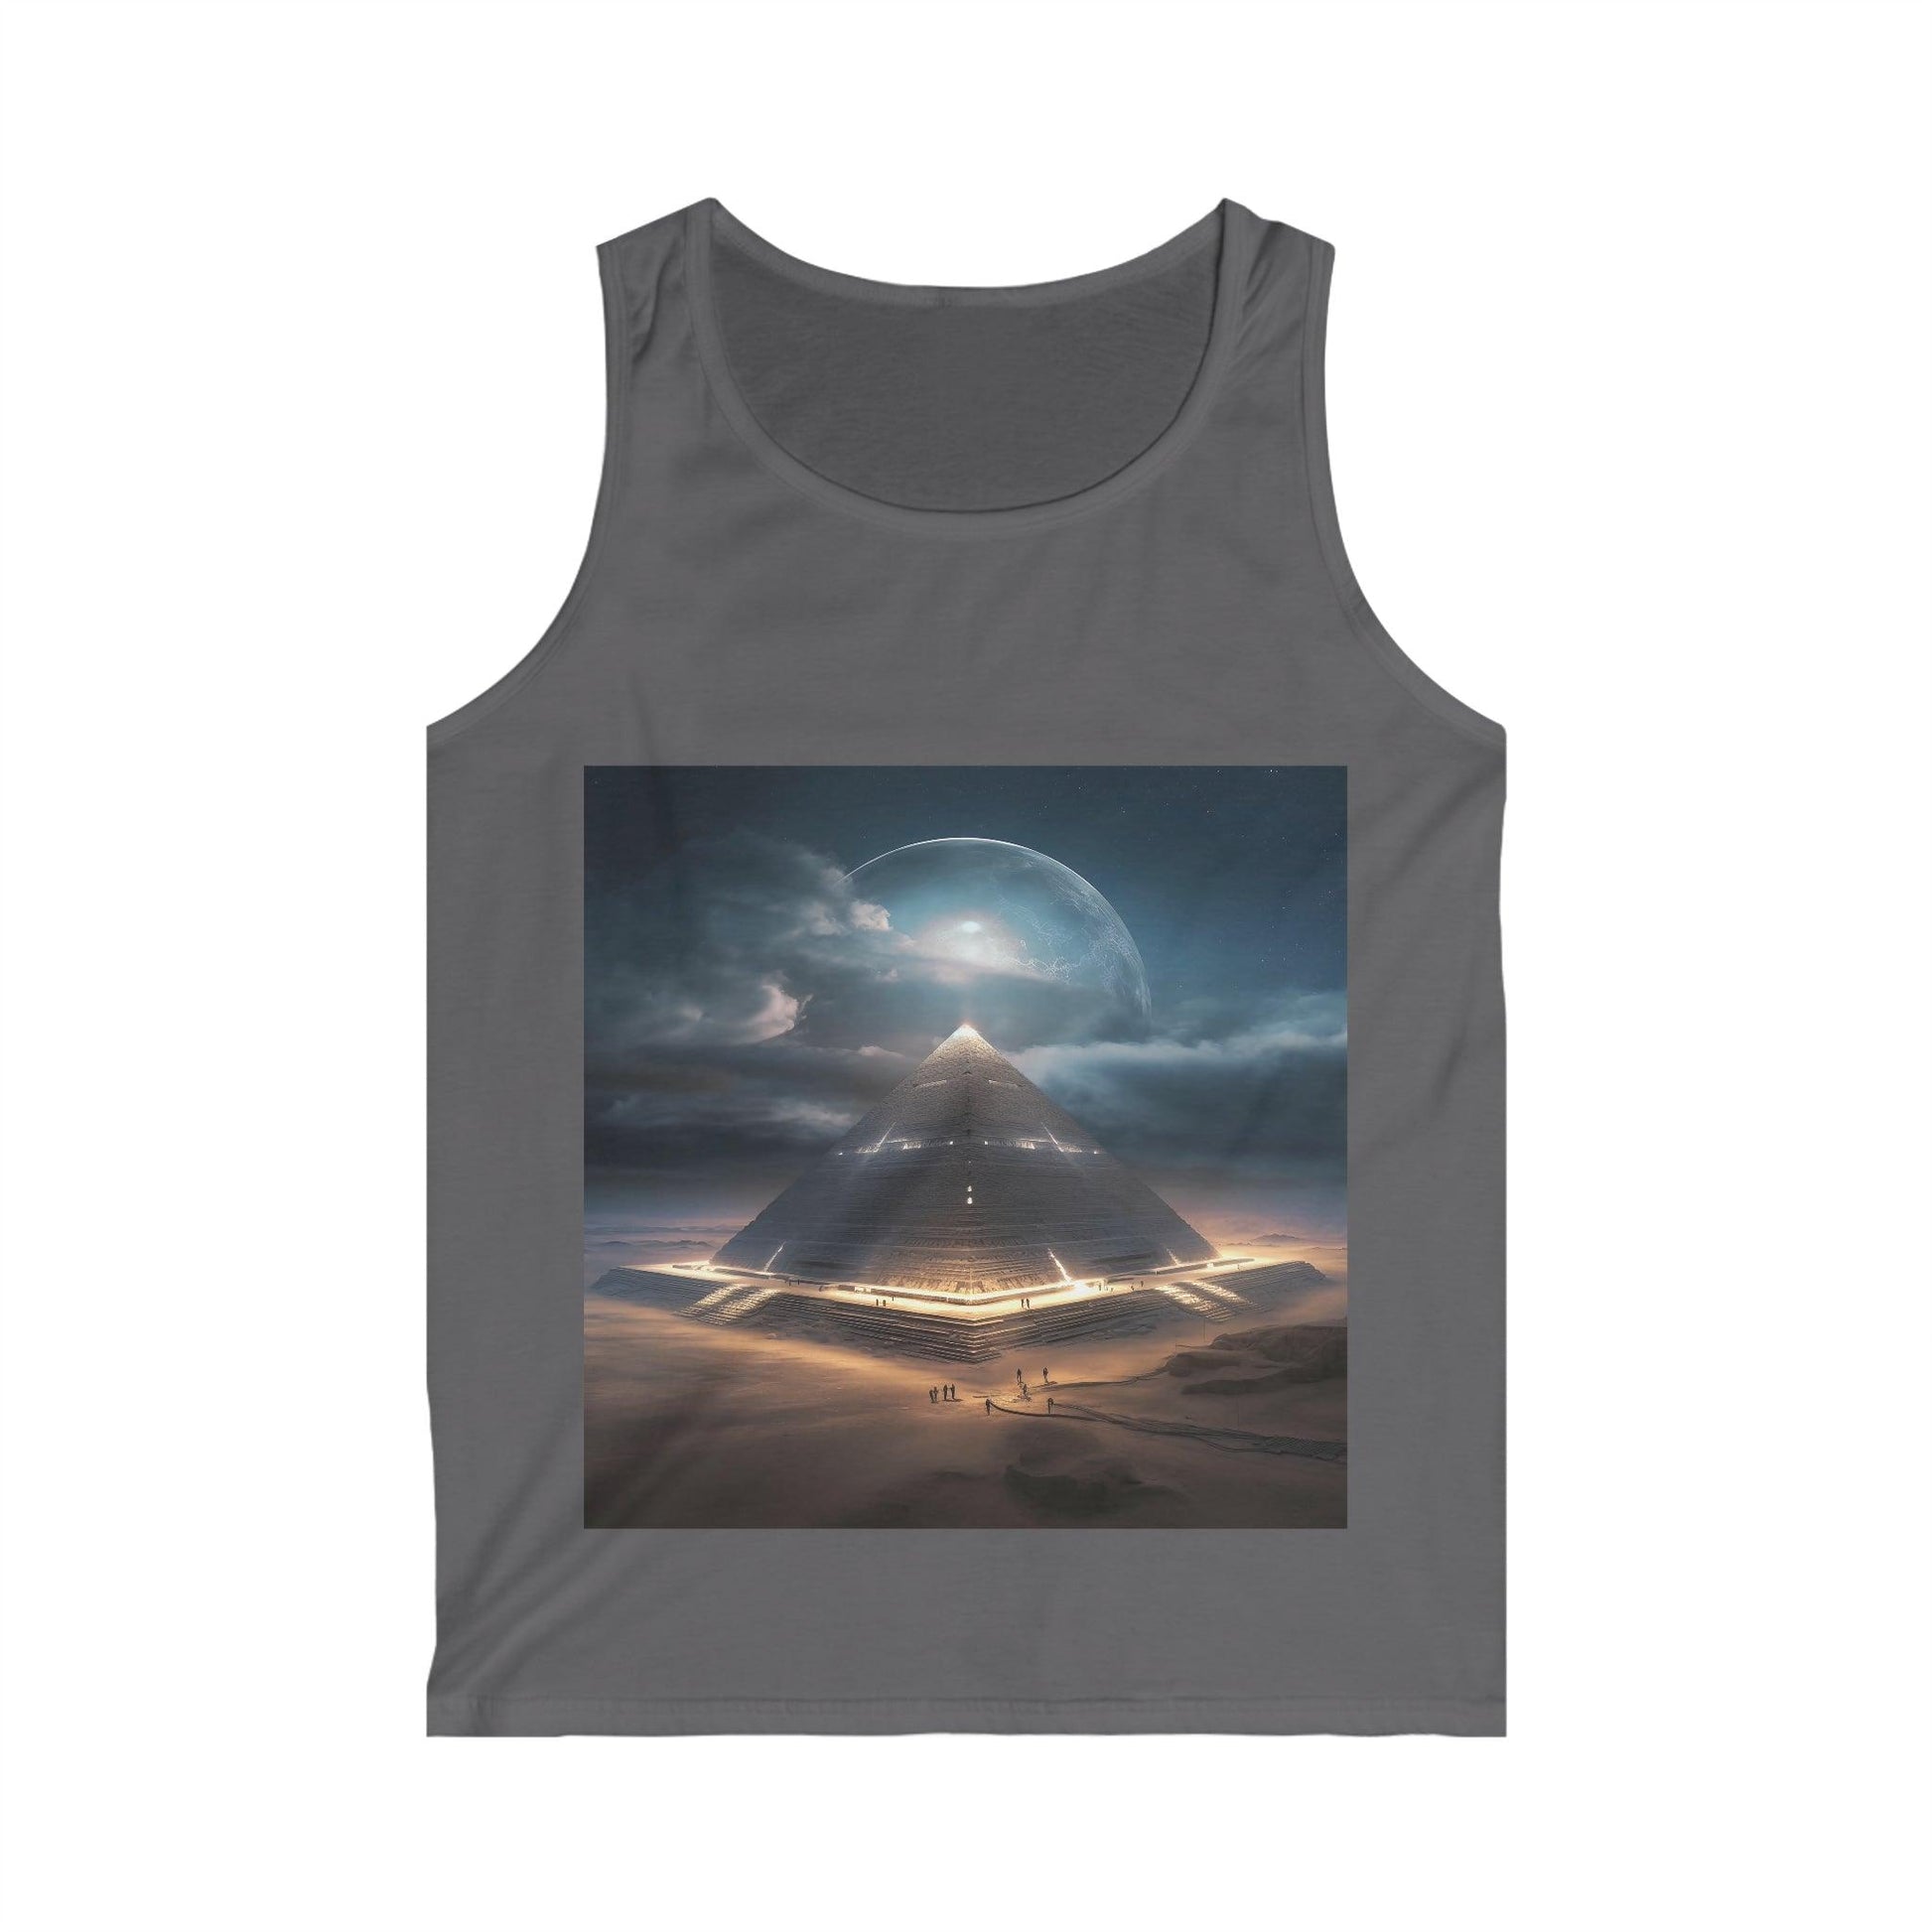 Cameron's Journey to the Eclipse at The Egyptian Pyramids - Visionary Psychedelic Ai Art Men's and Women's Unisex Softstyle Tank Top for Festival and Street Wear - Alchemystics.org